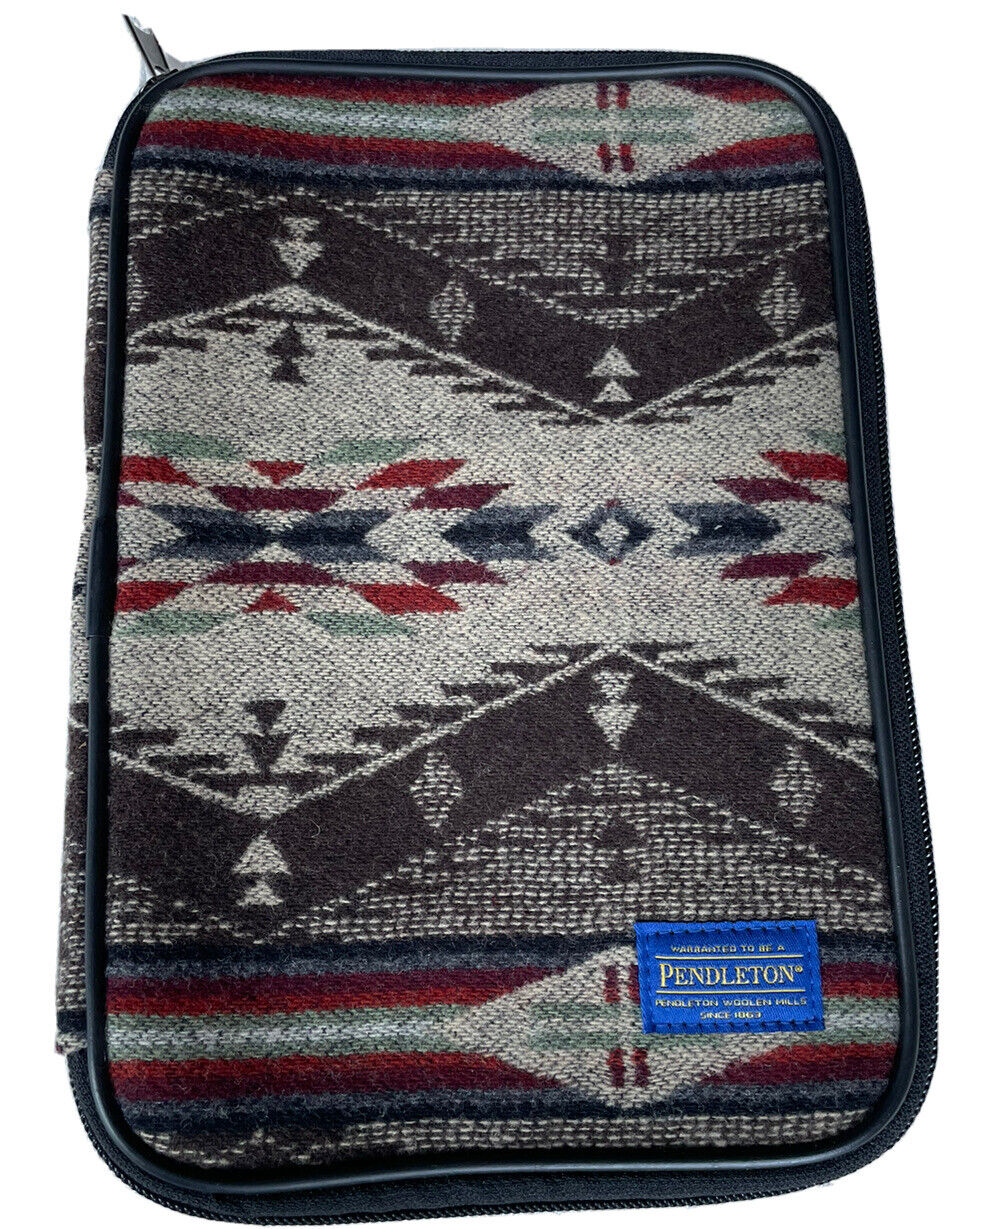 Pendleton Woolen Mills Southwest tablet pouch 6.5x9.5 Red Tan Brown Great Cond